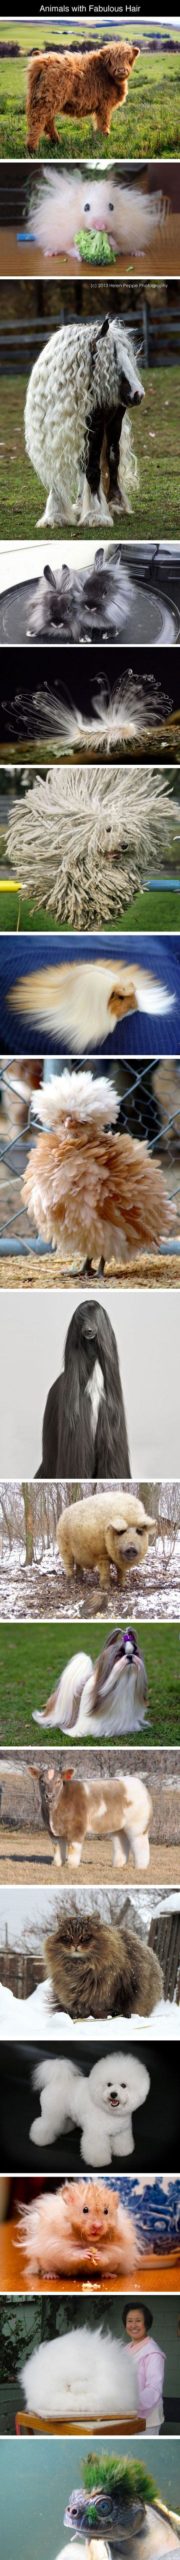 Animals+with+fab+hair.